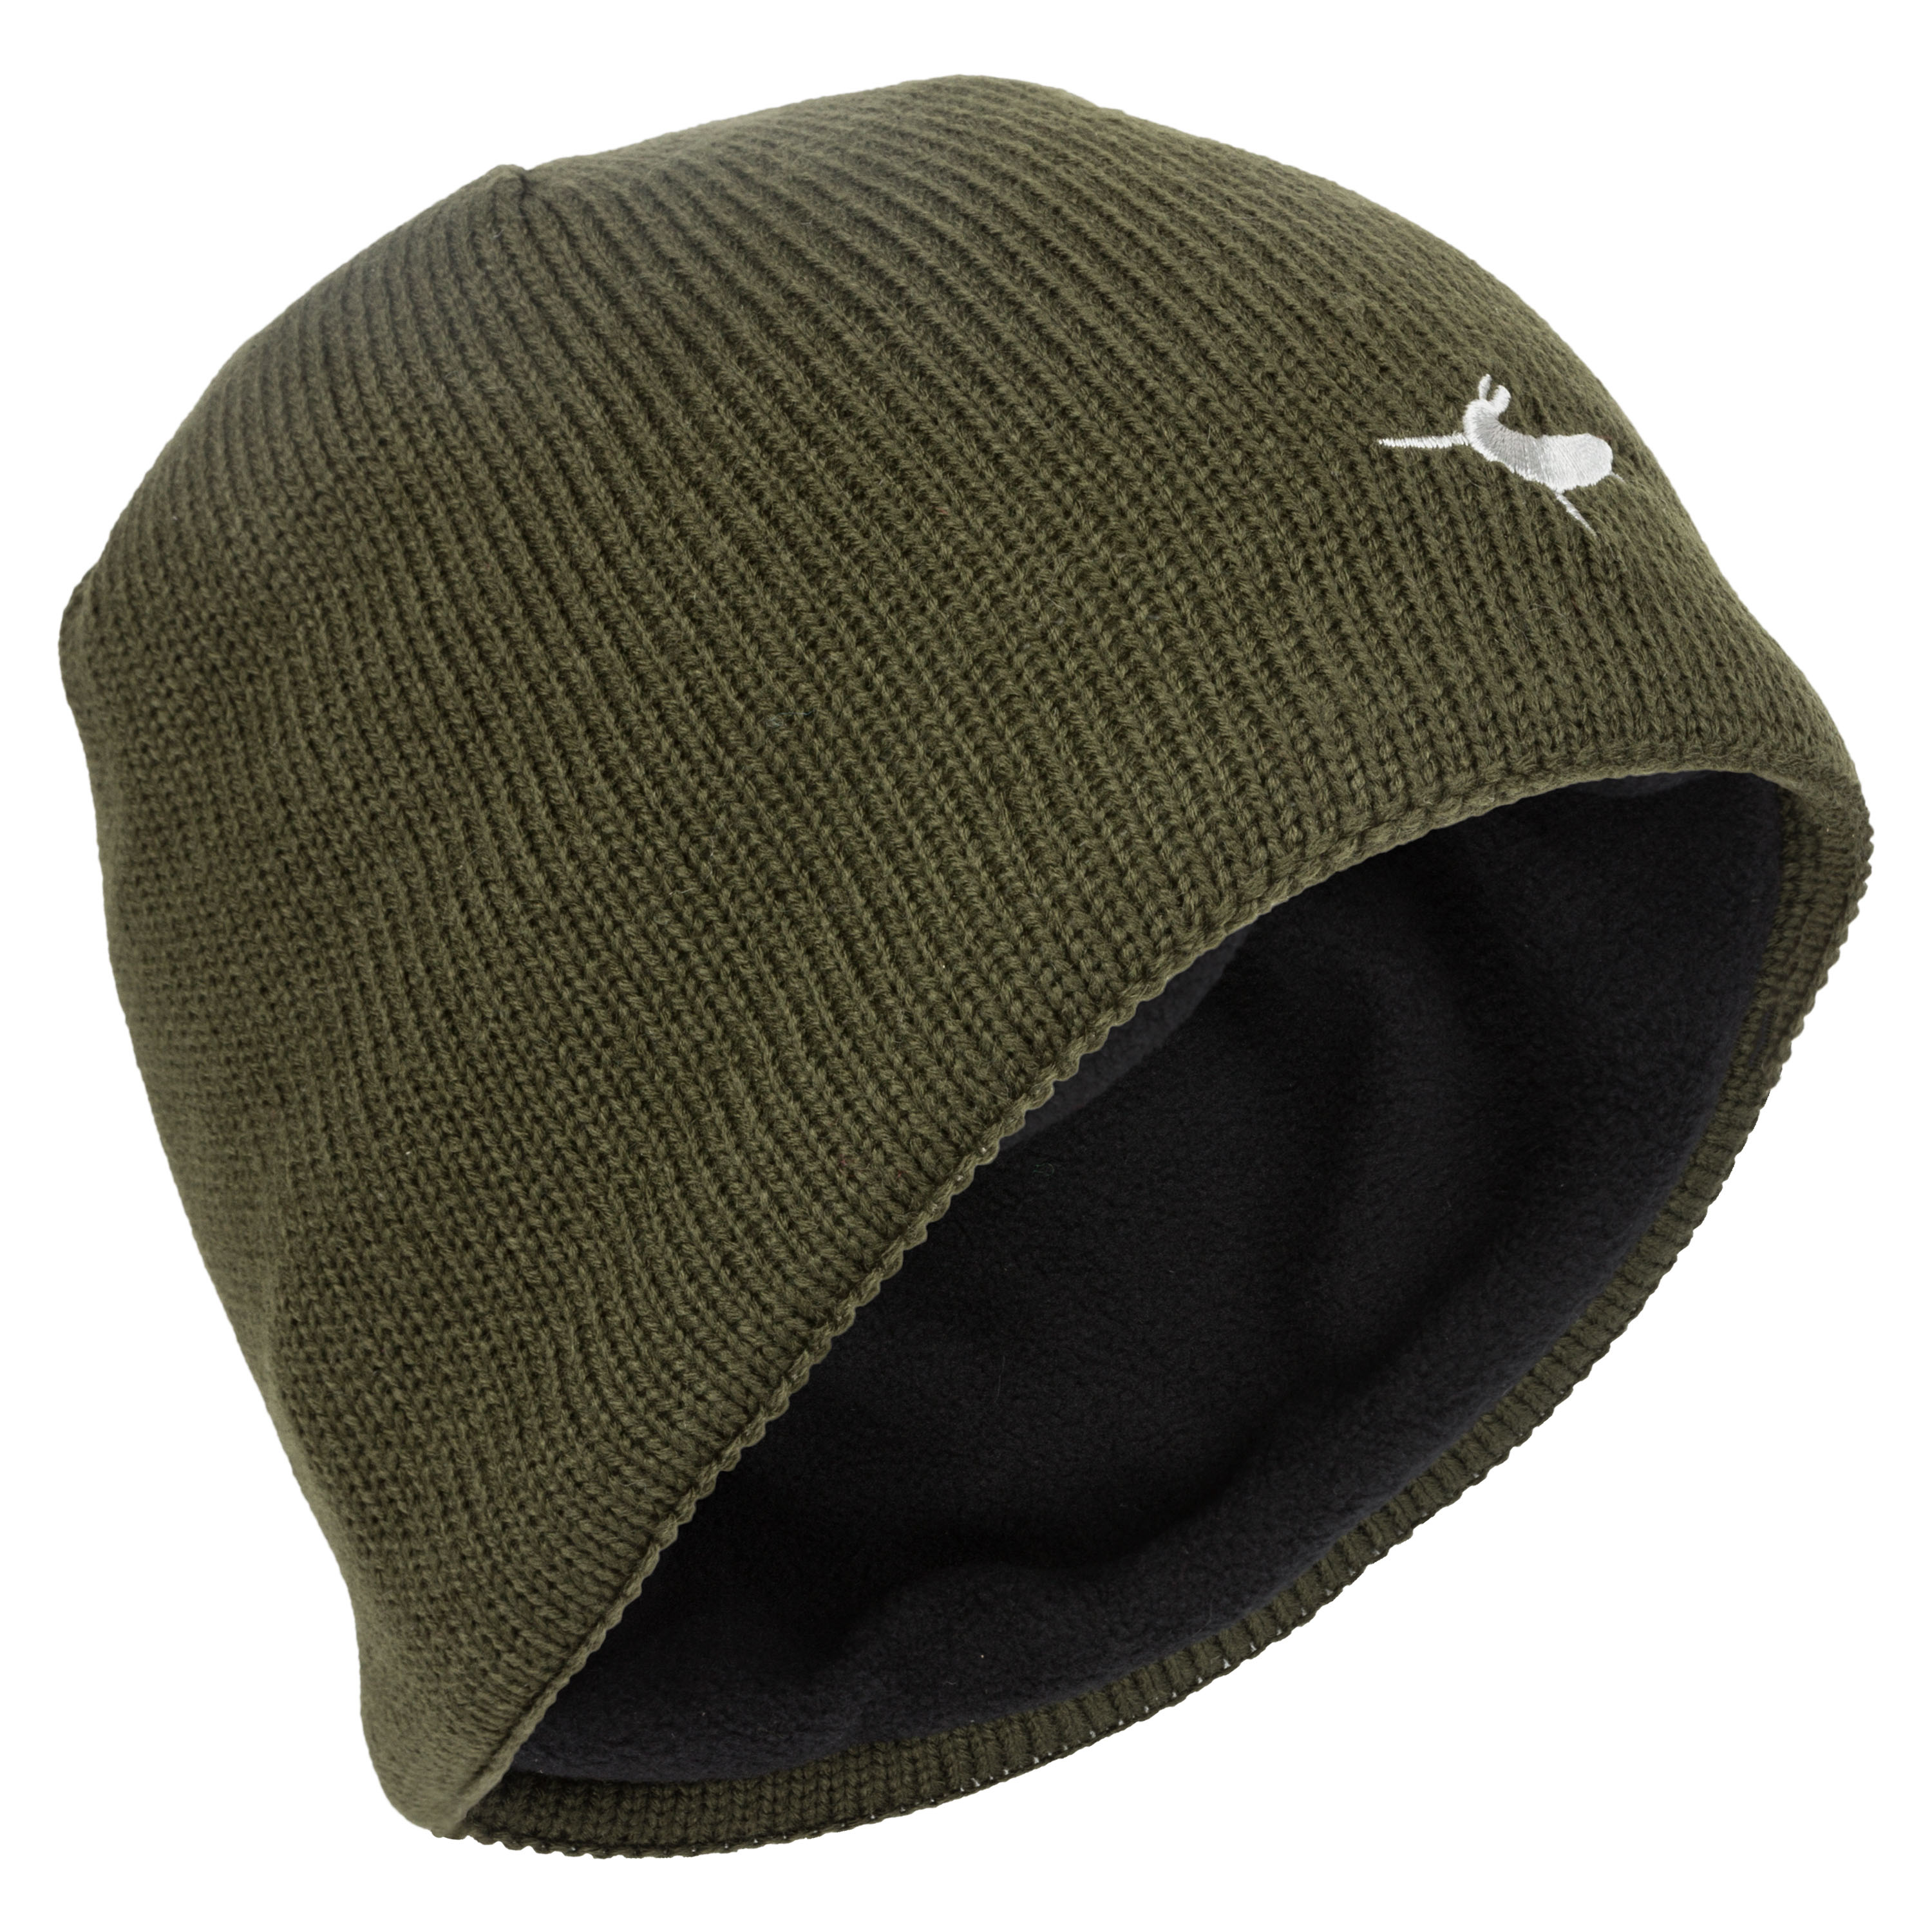 Purchae the SealSkinz Beanie Hat Waterproof olive by ASMC